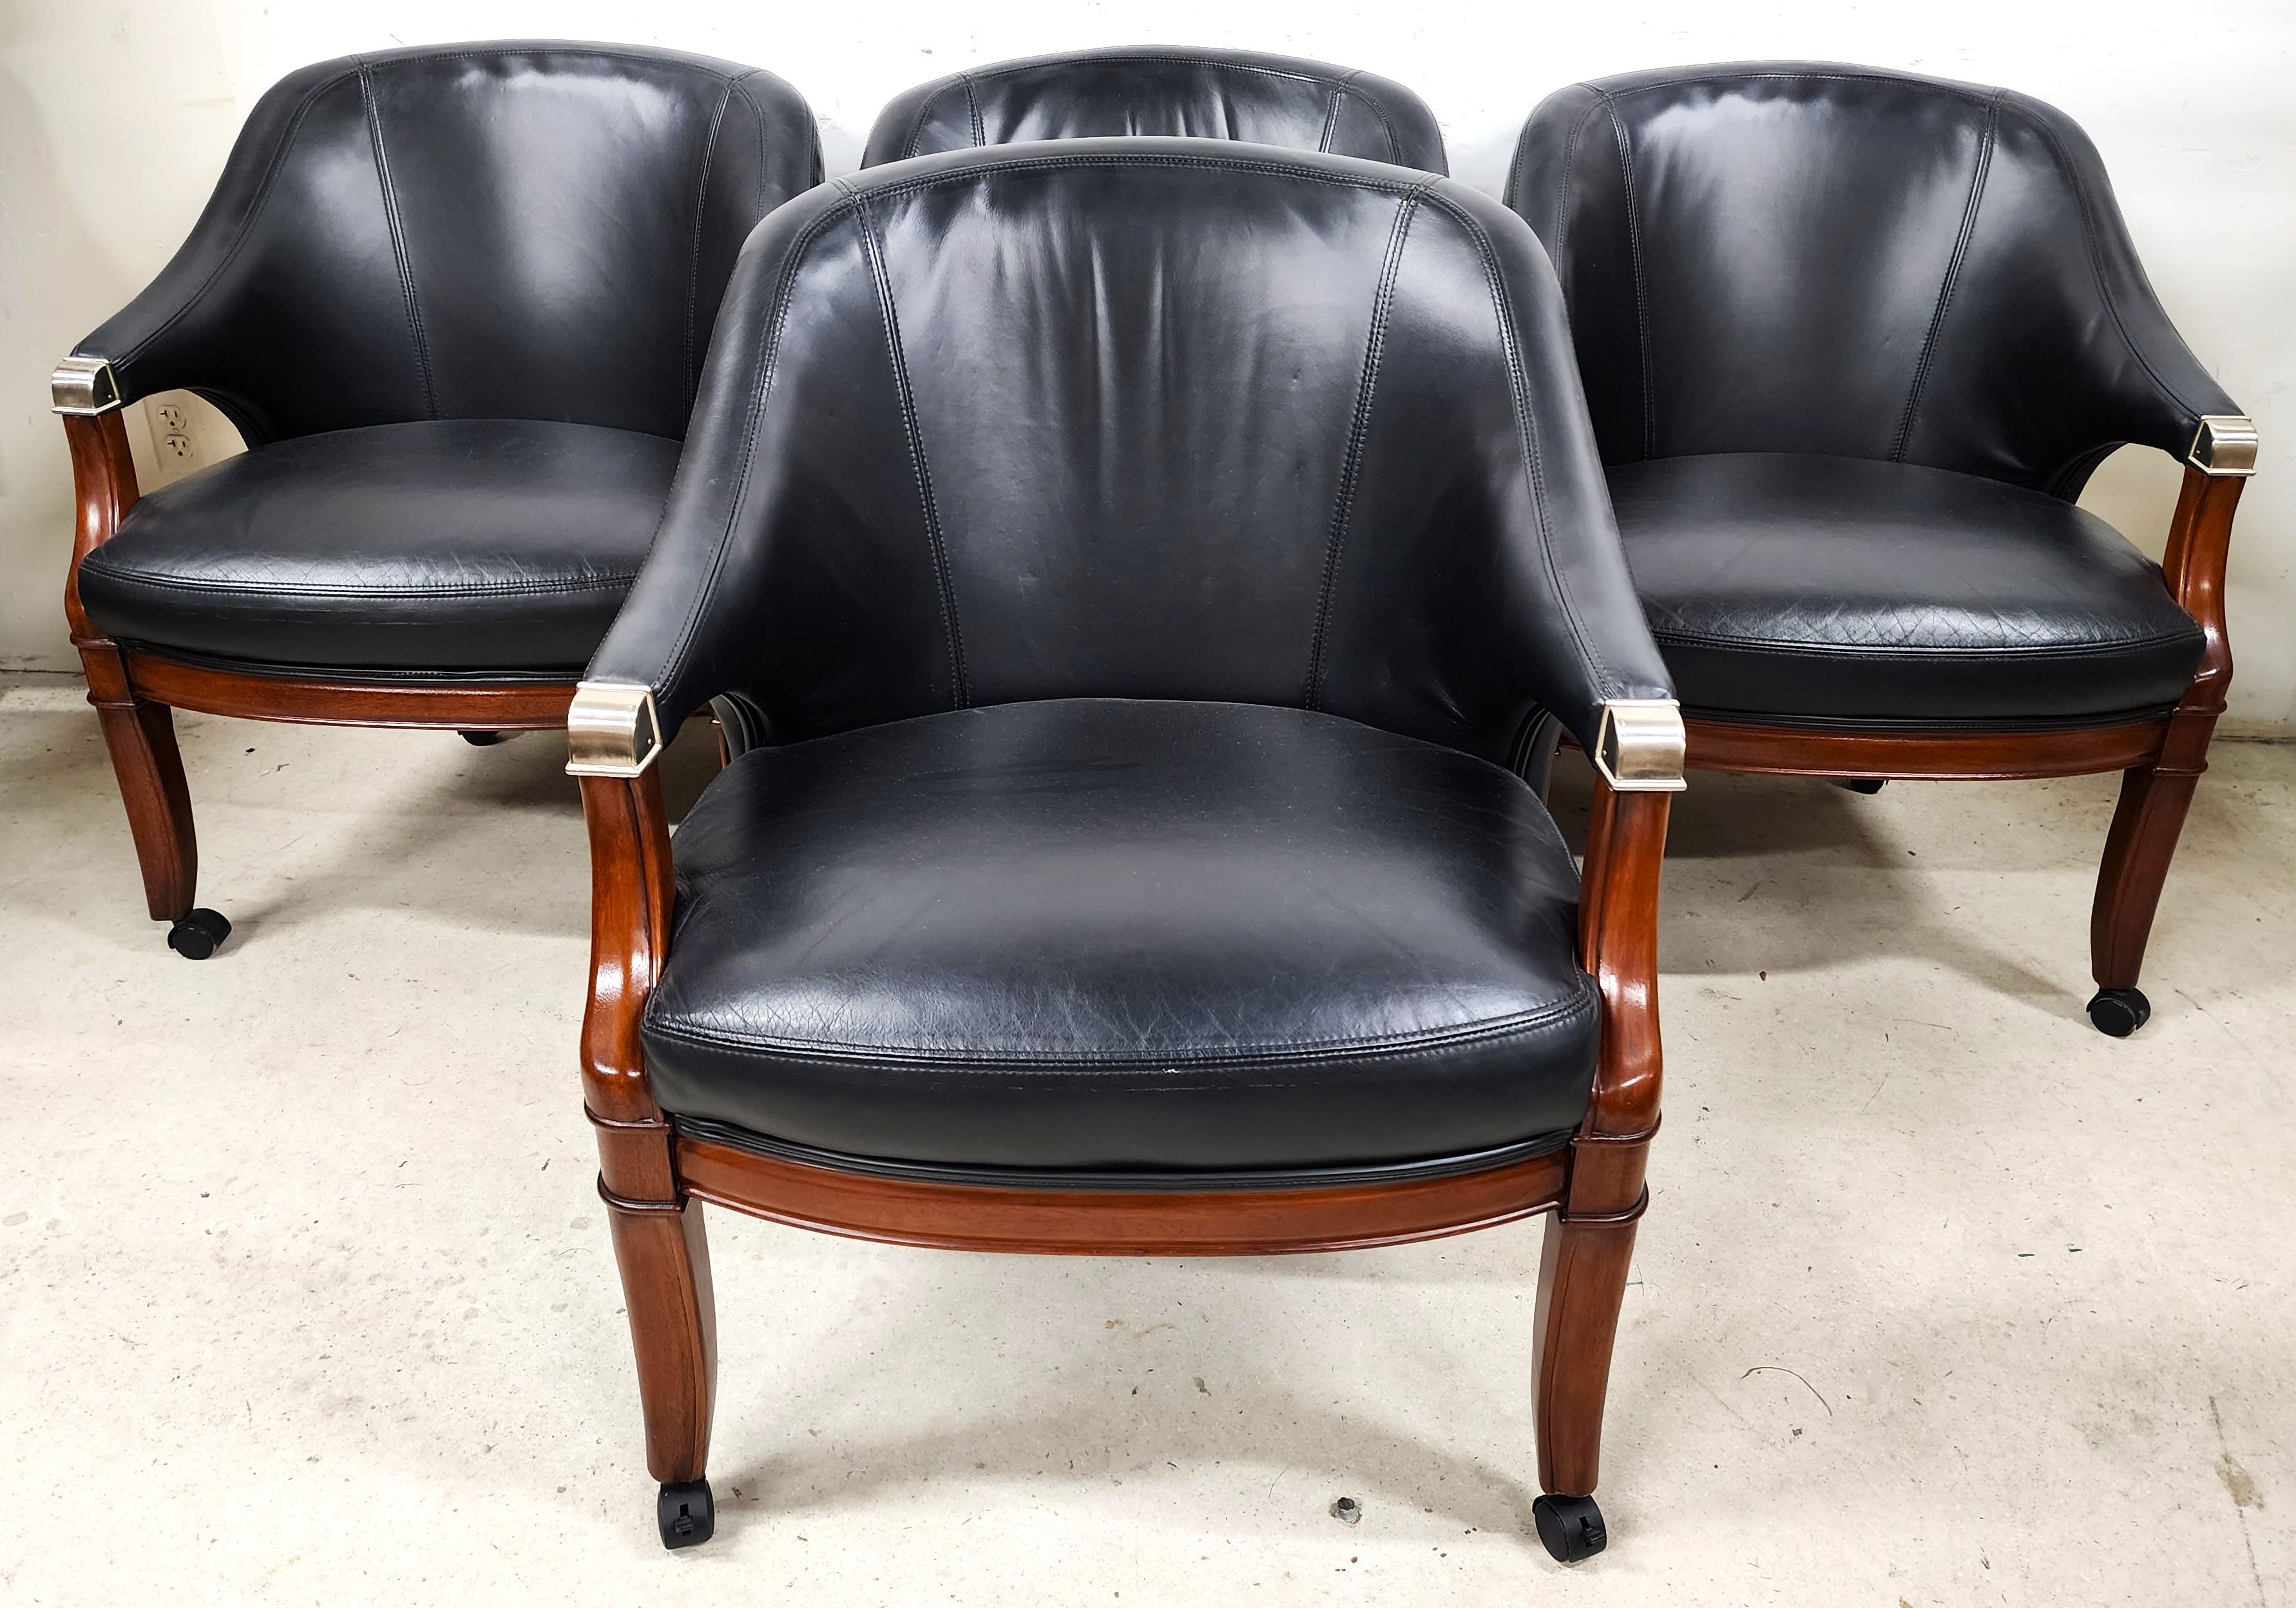 For FULL item description click on CONTINUE READING at the bottom of this page.

Offering One Of Our Recent Palm Beach Estate Fine Furniture Acquisitions Of A
Set of 4 High-Grade Leather Dining Game Rolling Armchairs by THOMASVILLE

Approximate